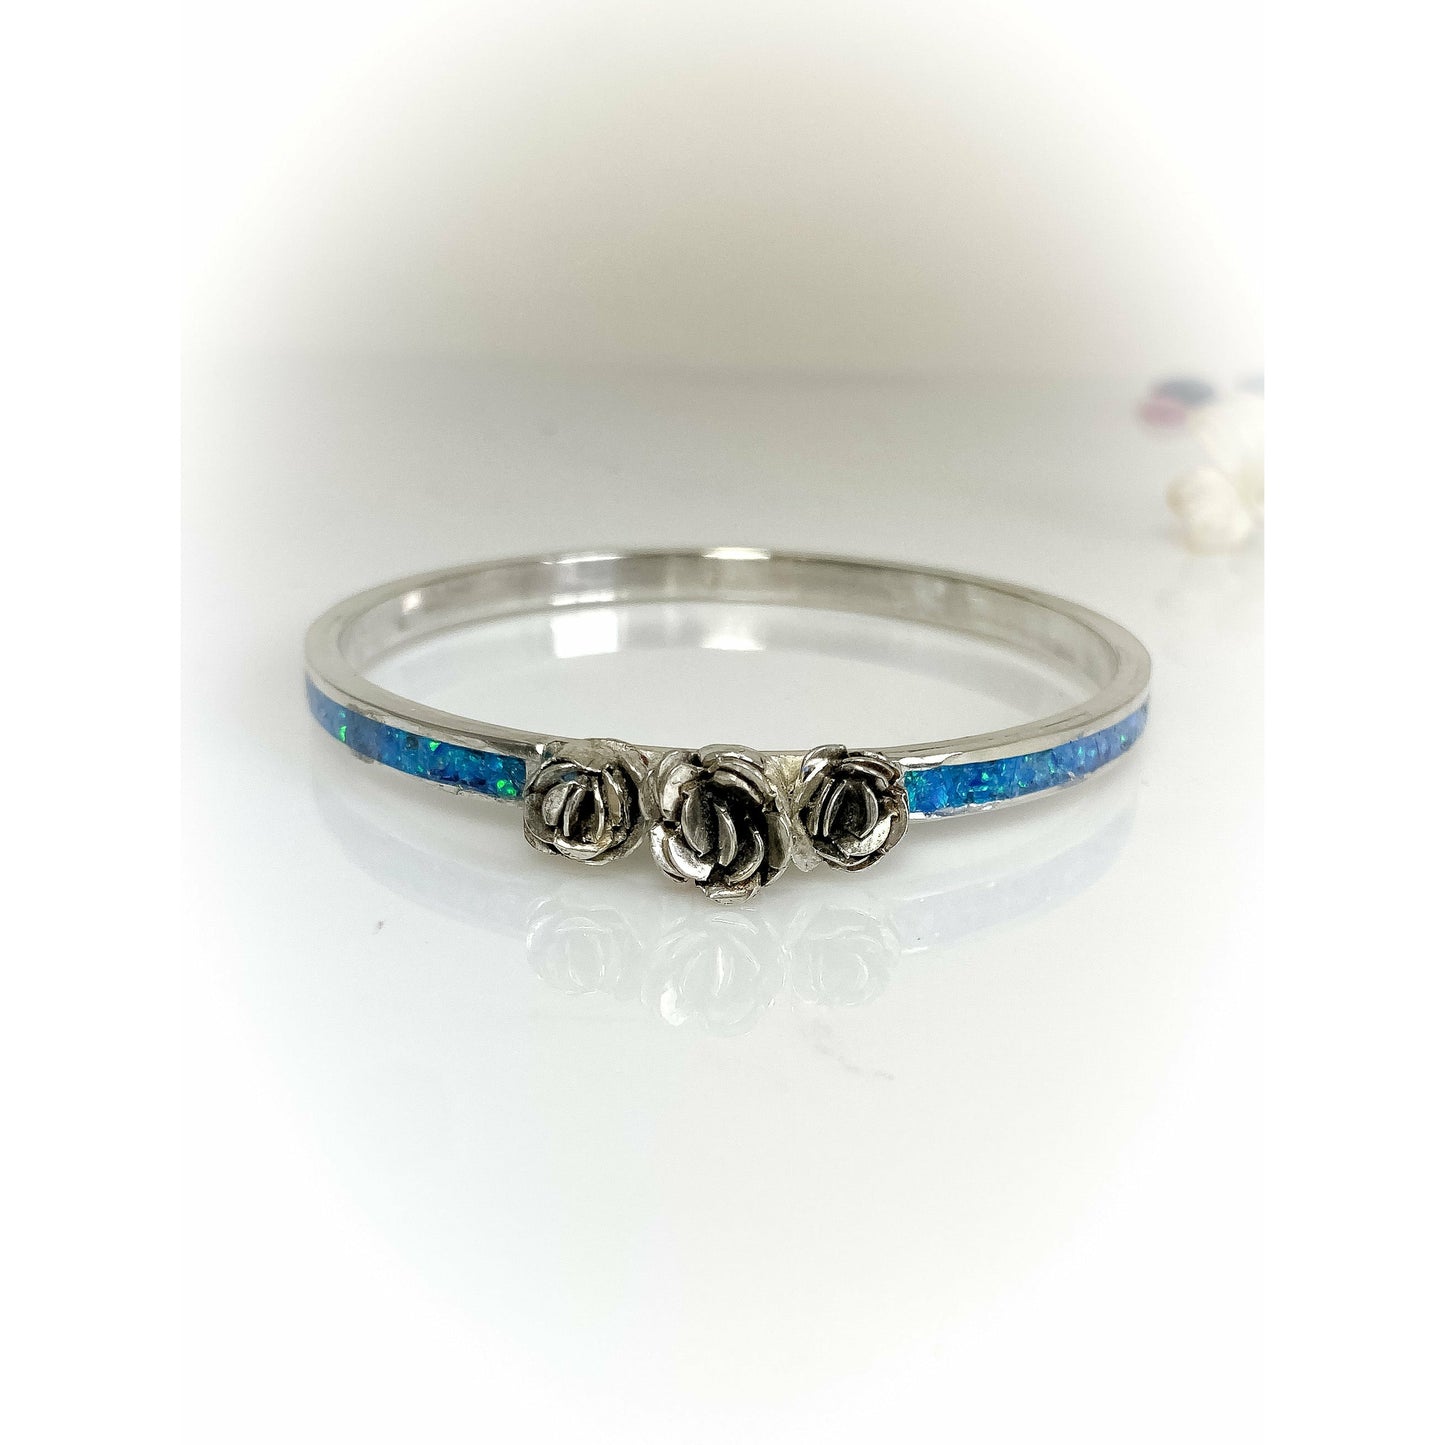 Australian Blue Opal Inlay Bracelet with Three Sterling Silver Roses